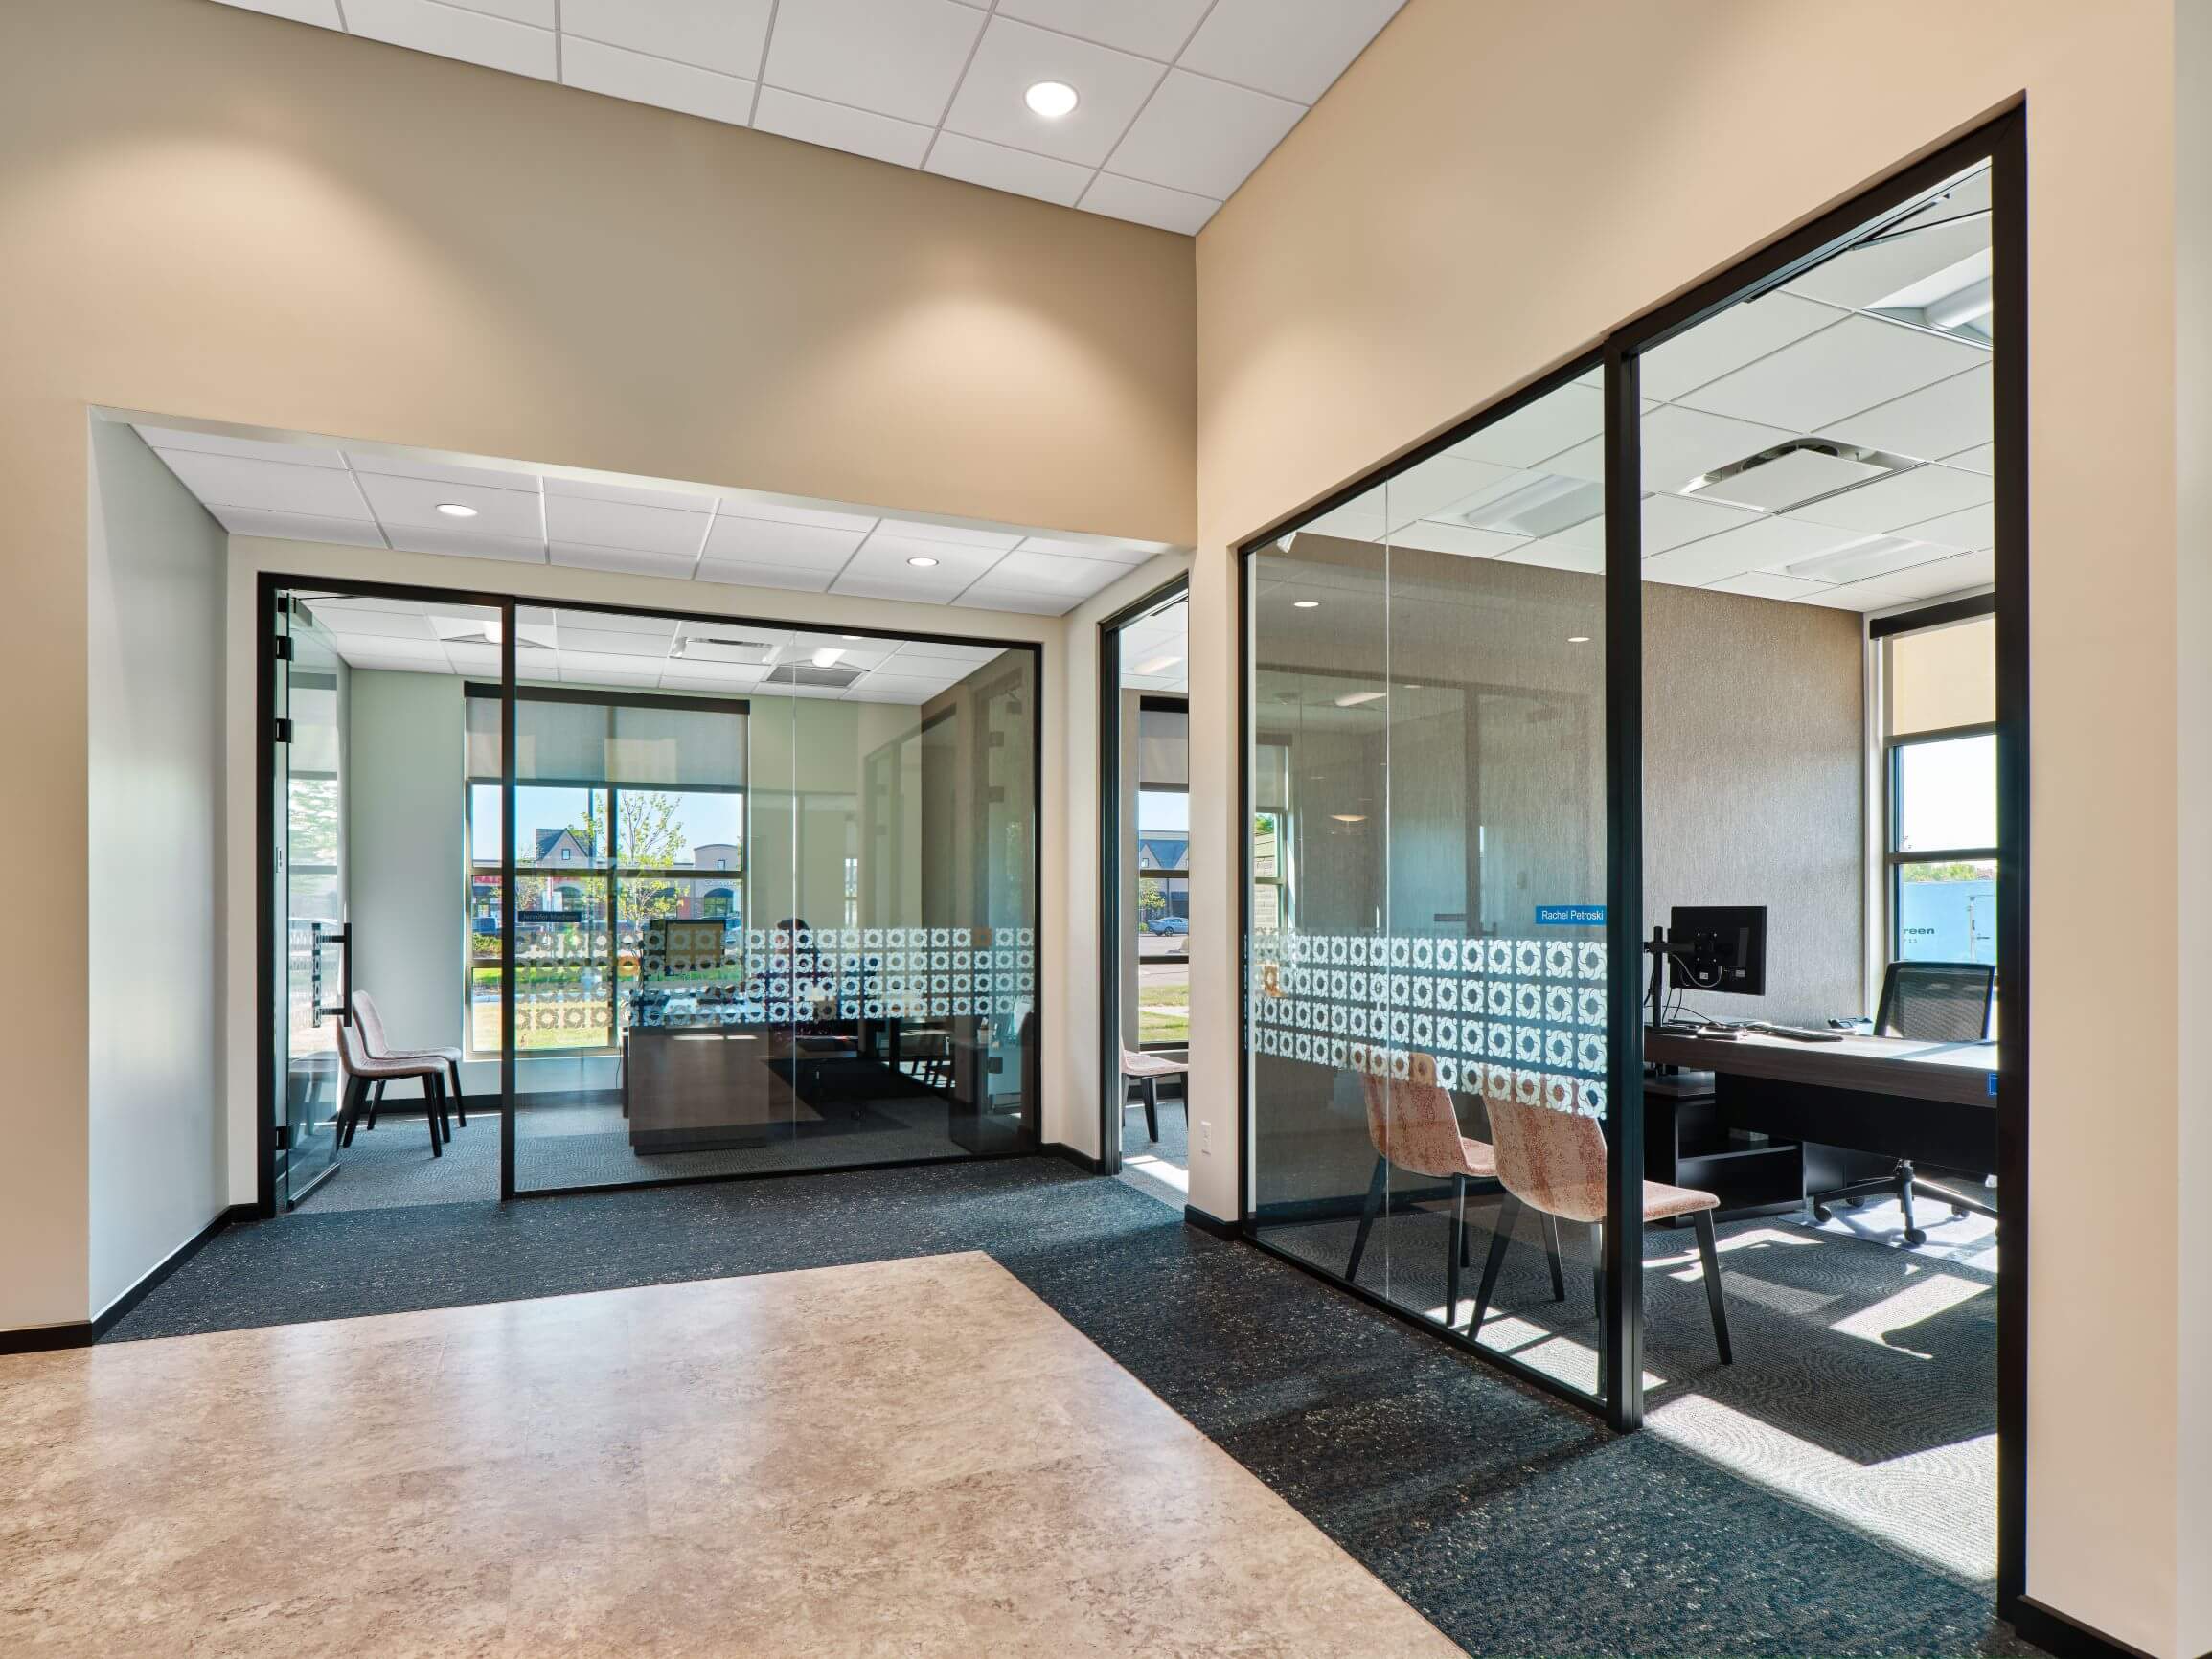 Private offices for flexible one on one meetings with members